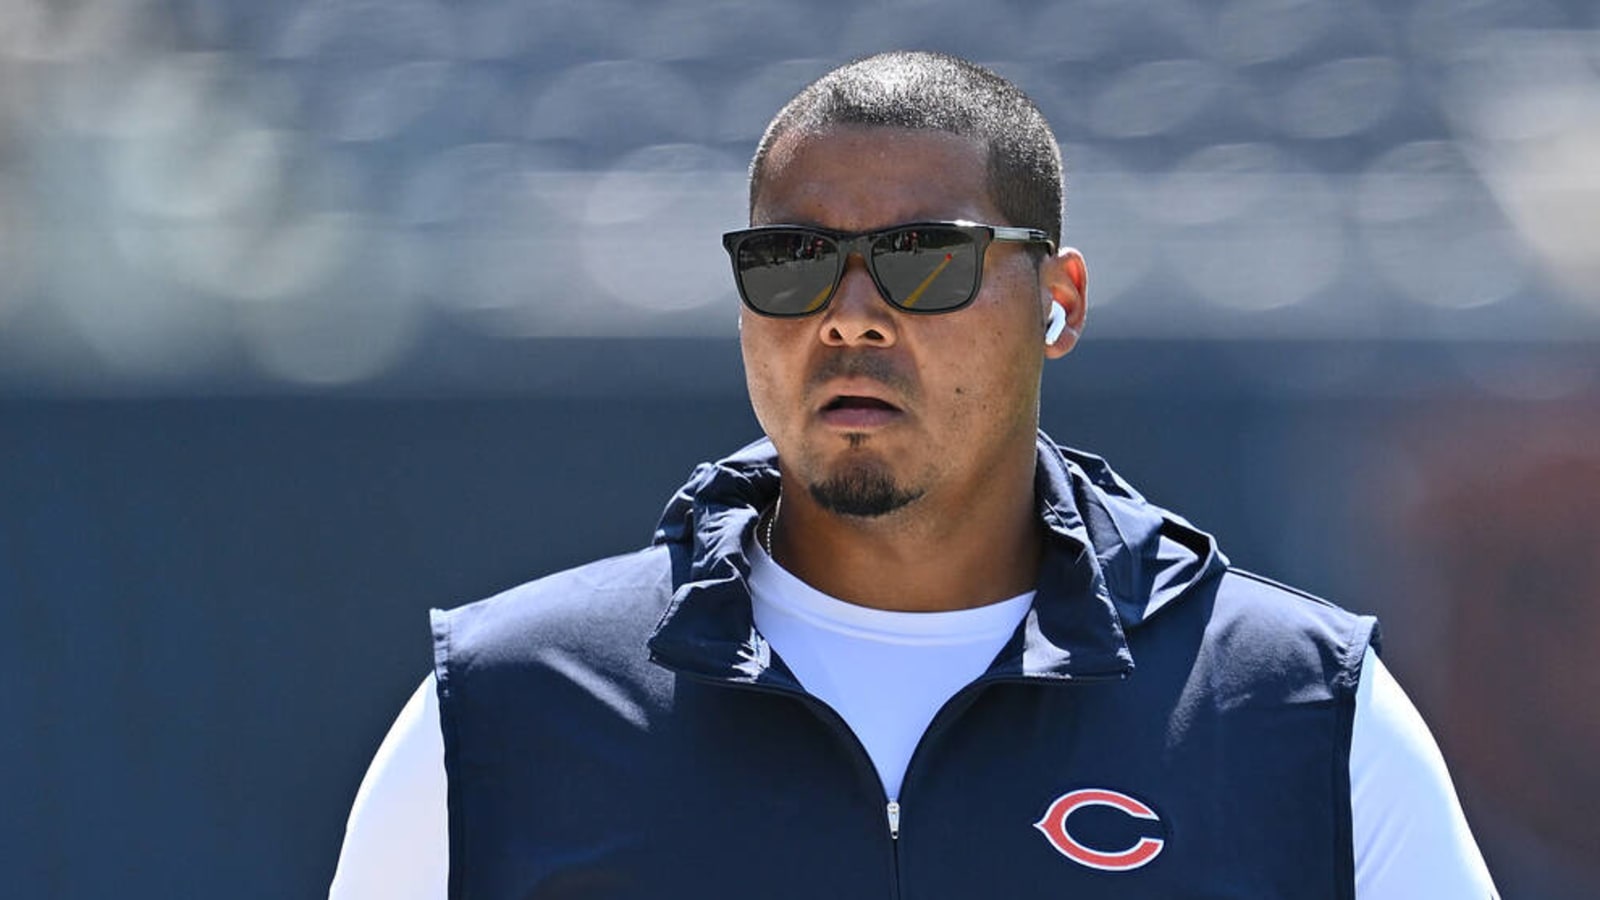 Bears GM sounds off on RG3’s outlandish Williams take